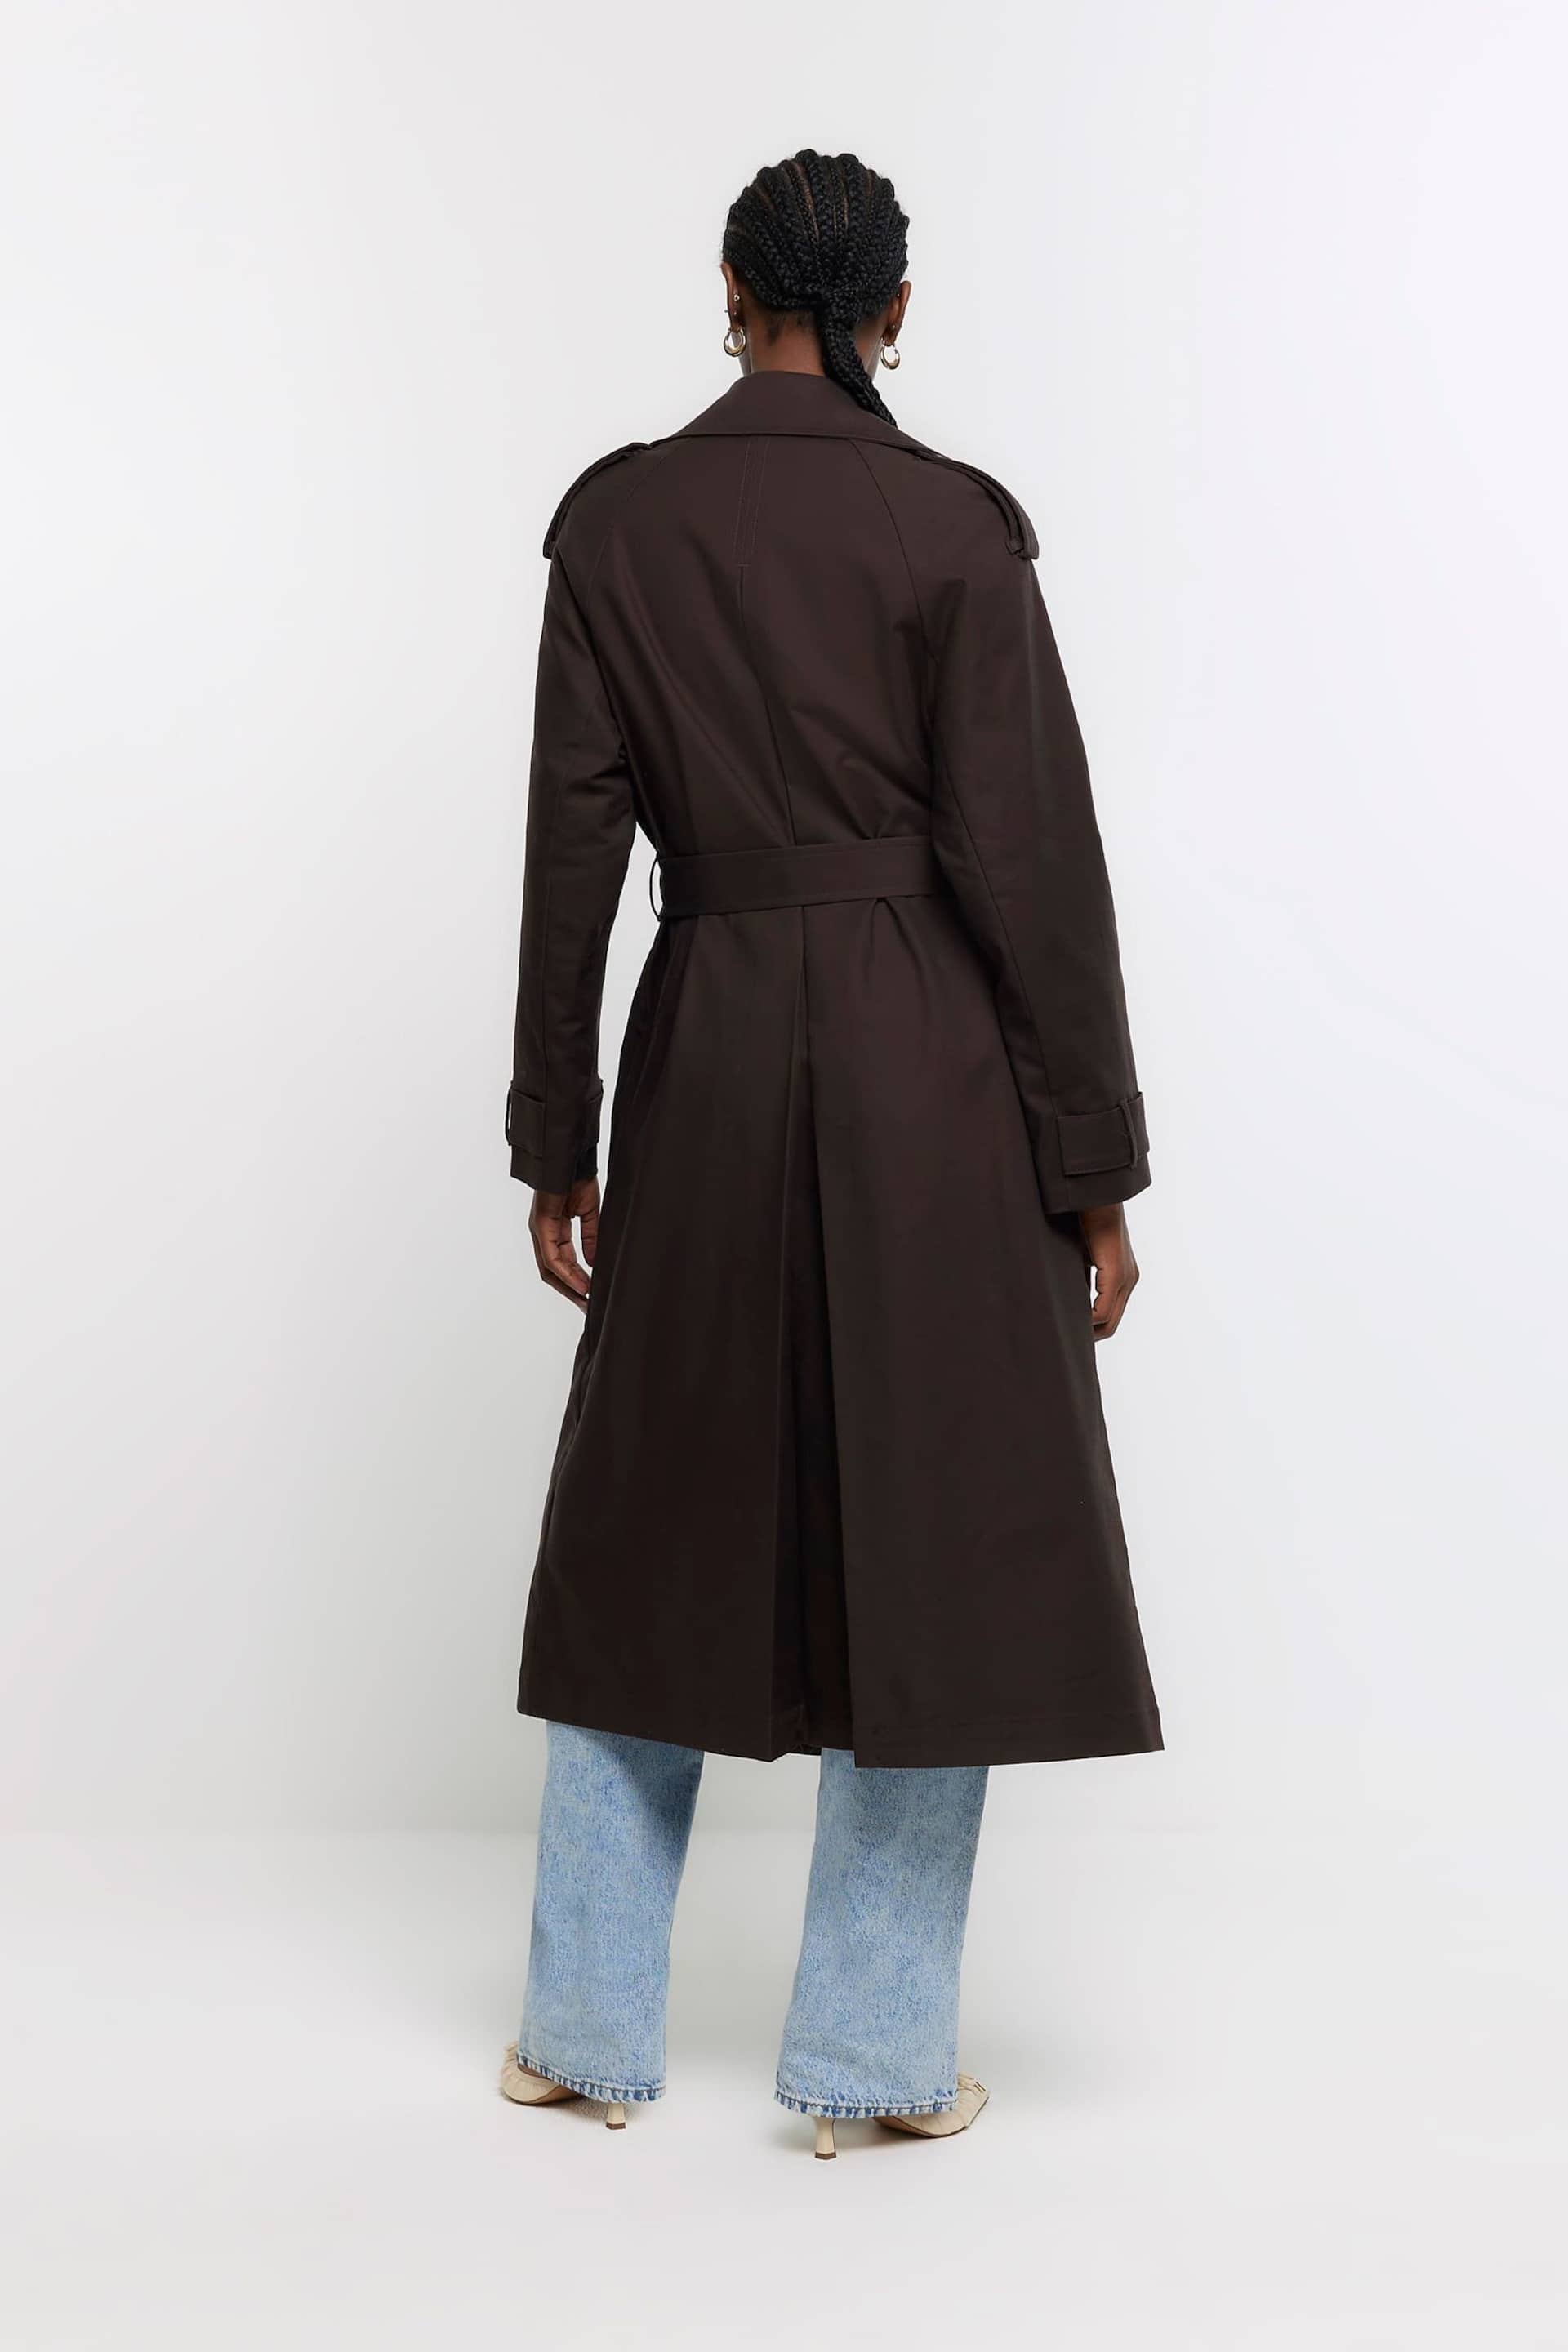 River Island Brown Double Collar Belted Trench Coat - Image 3 of 5